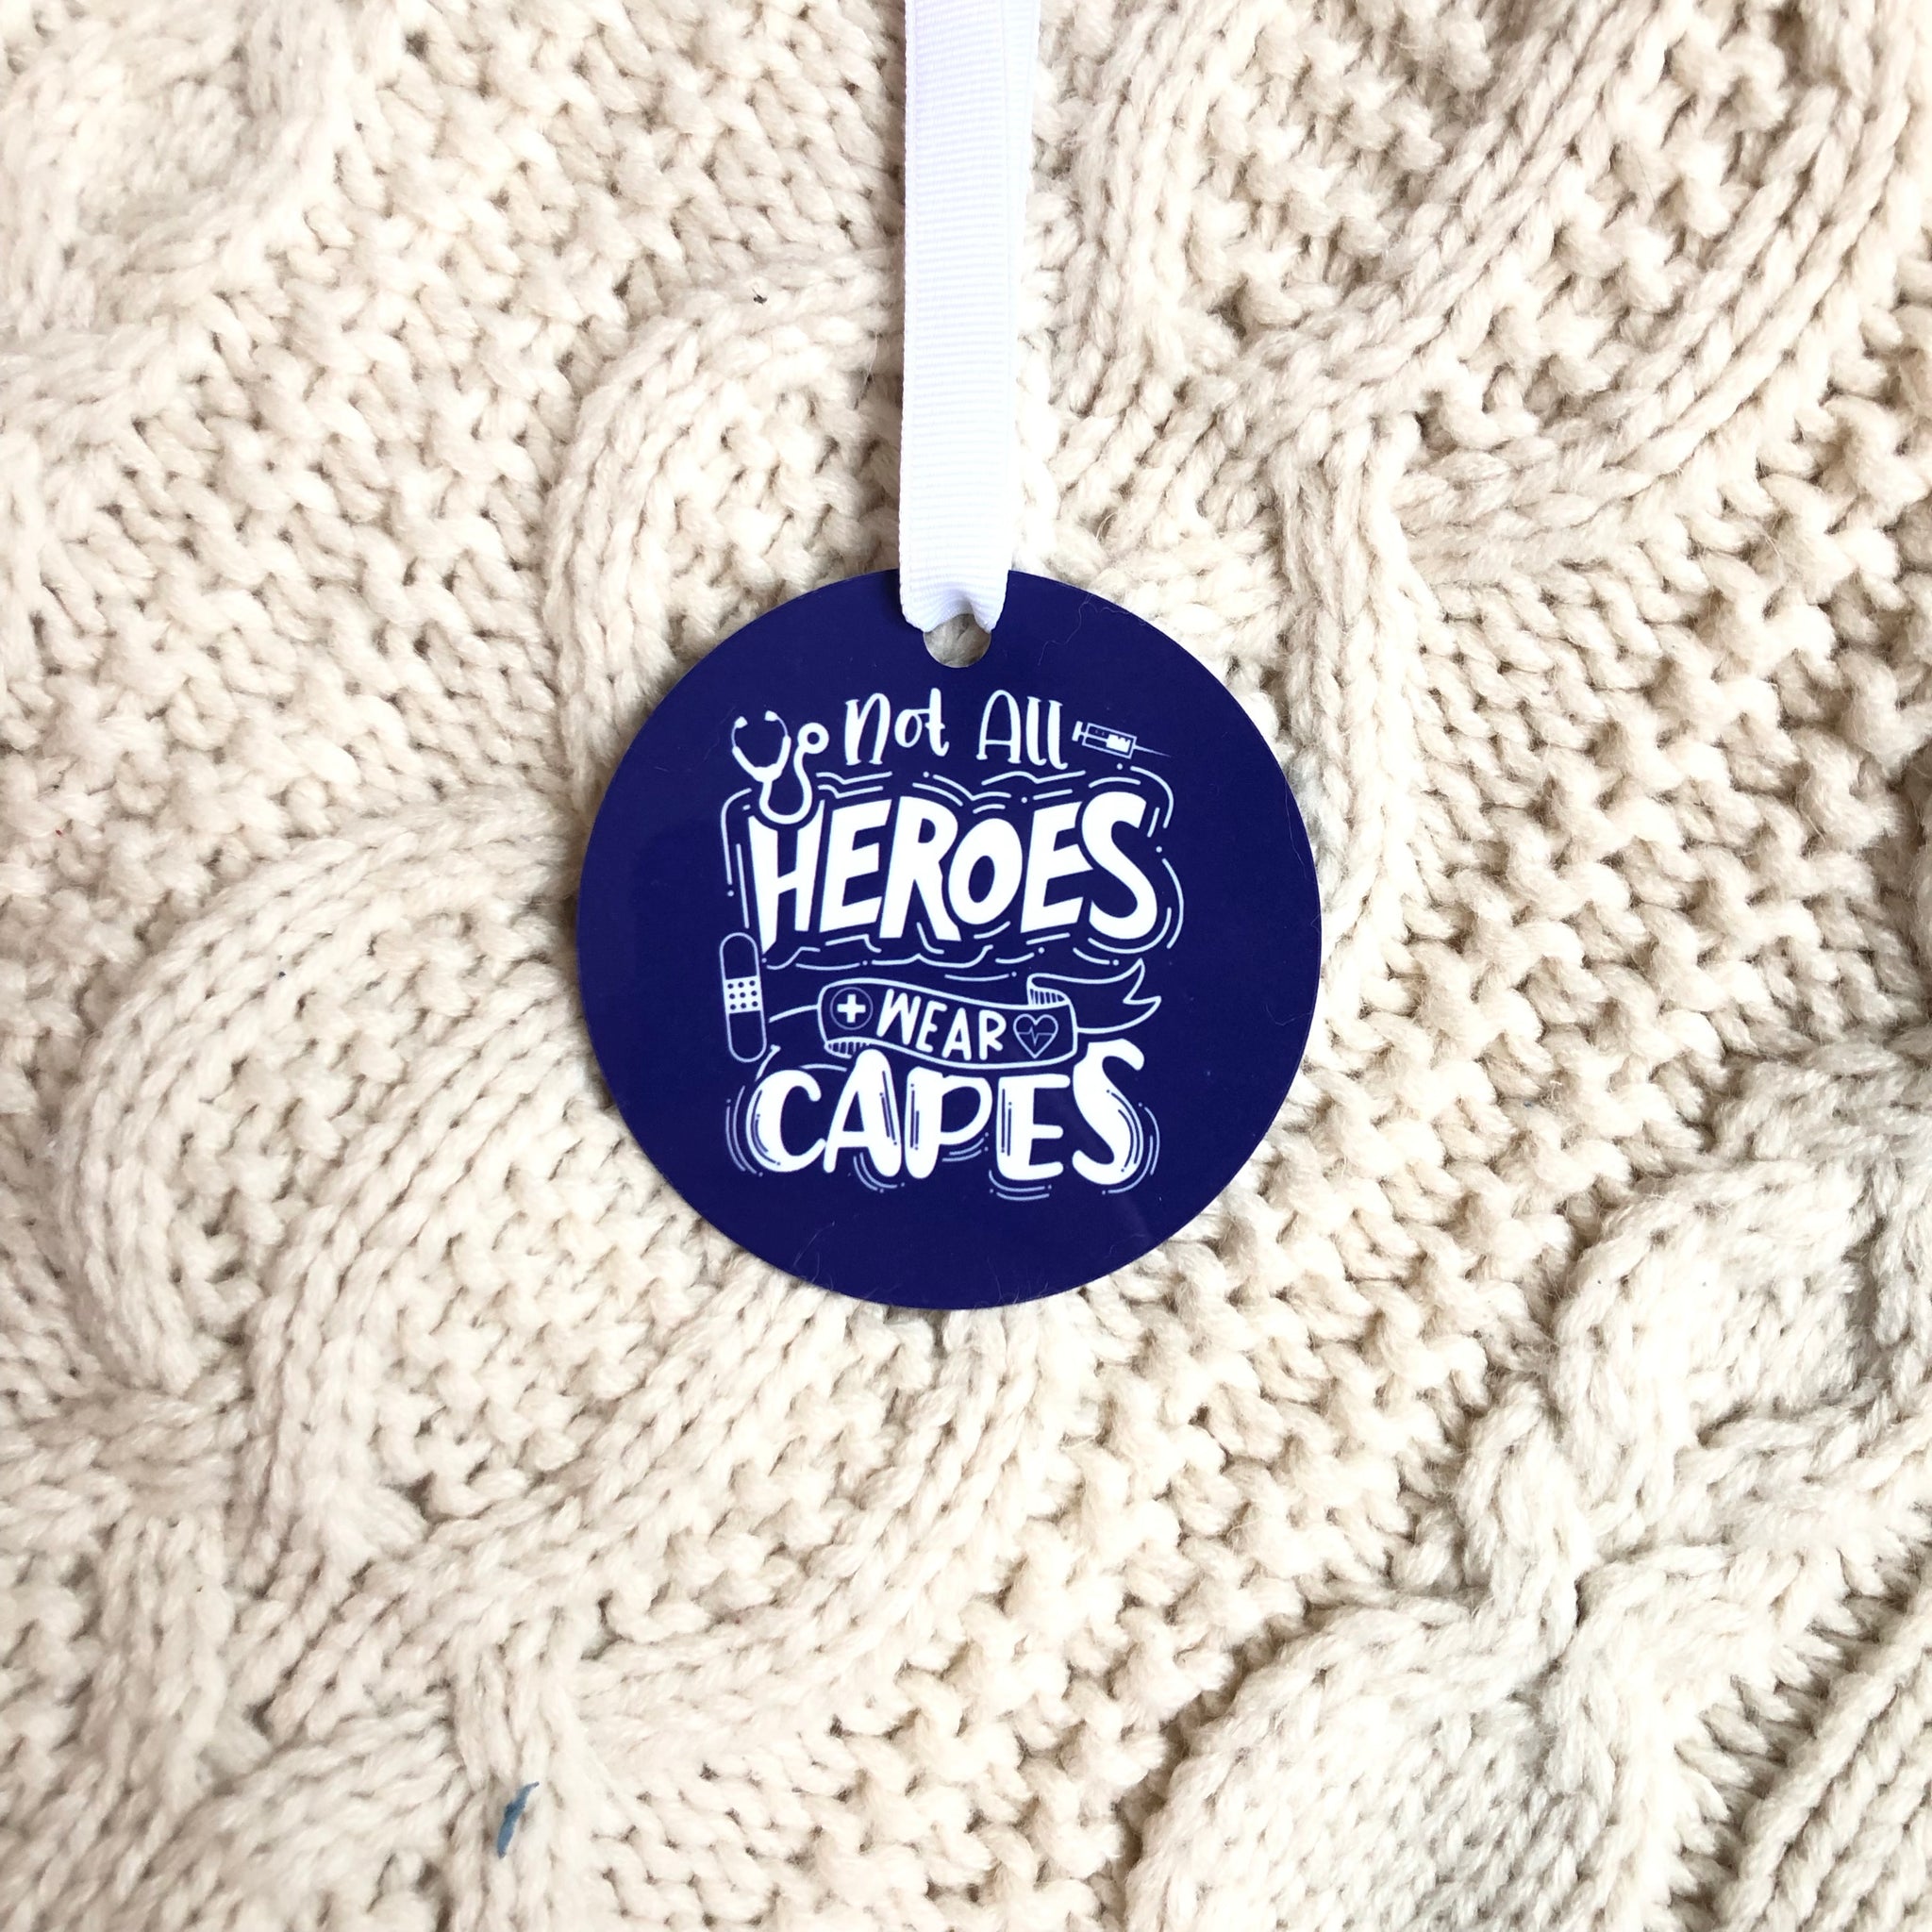 “Not All Super Heroes Wear Capes" Essential Medical Worker Themed Ornament - B2BW